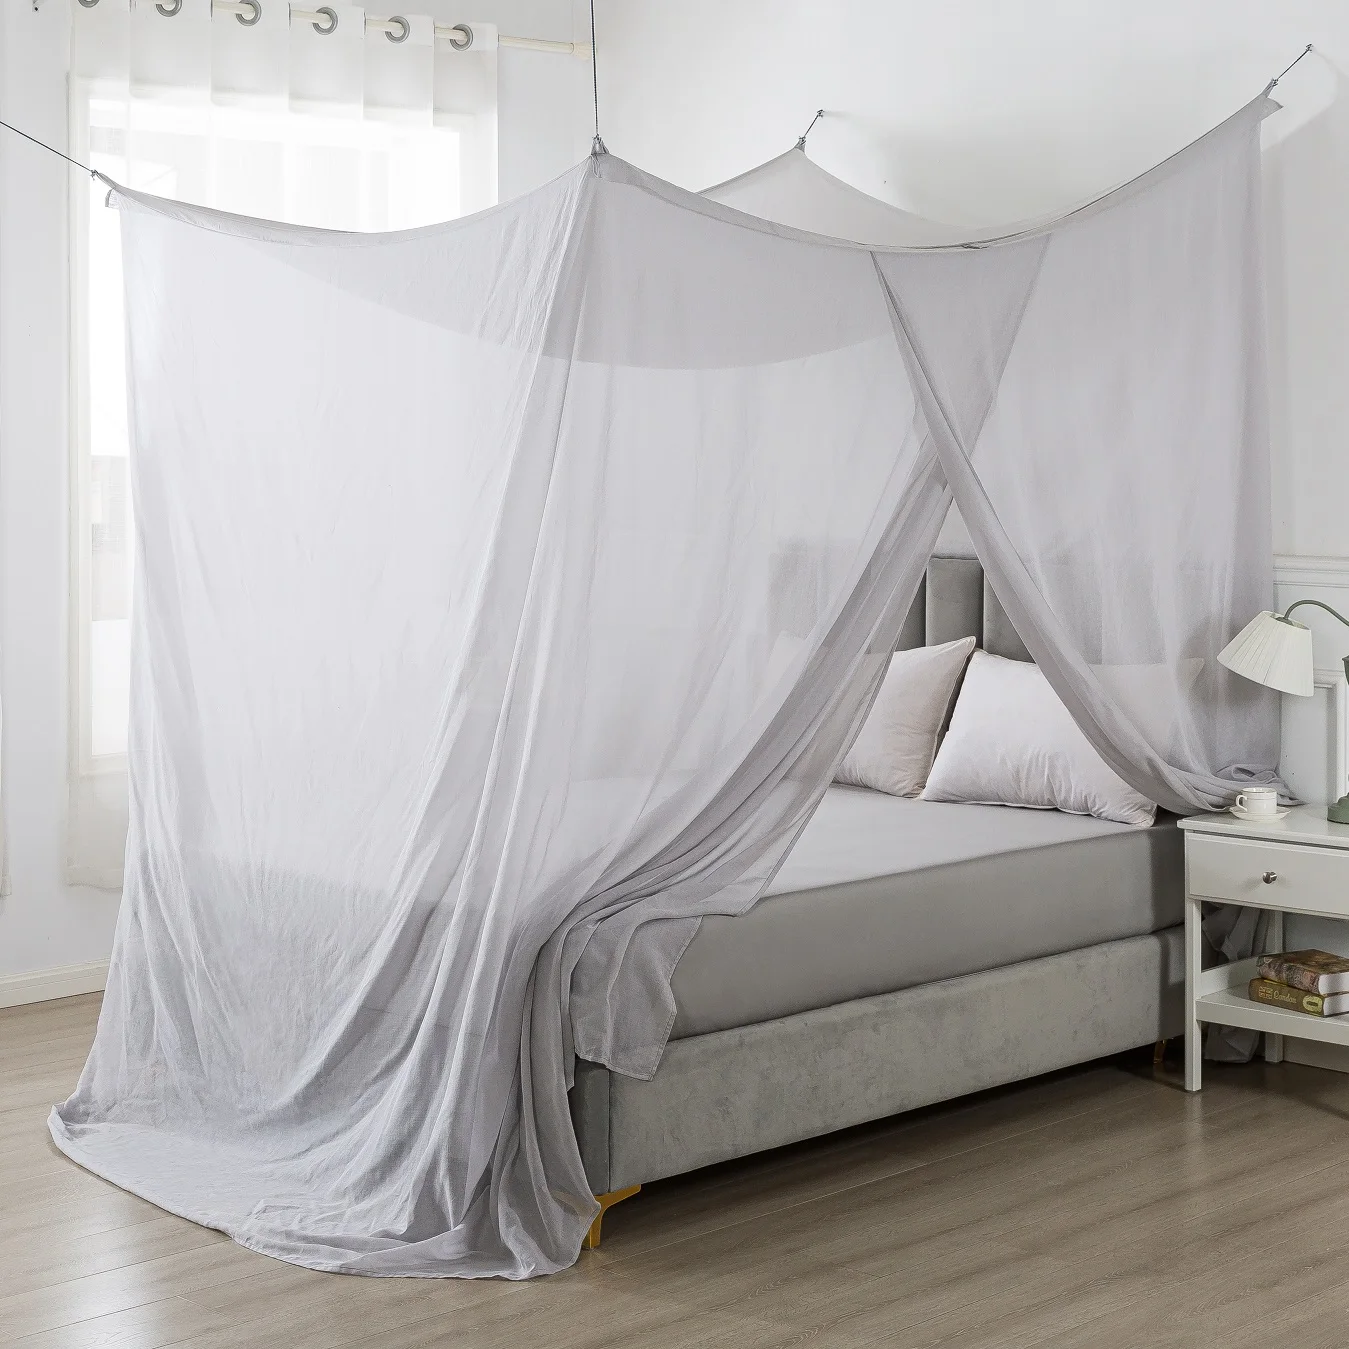 

UrGarding silver fiber&cotton emf/rf shielding and hf+lf bed mosquito mesh net radiation protection canopy for single bed